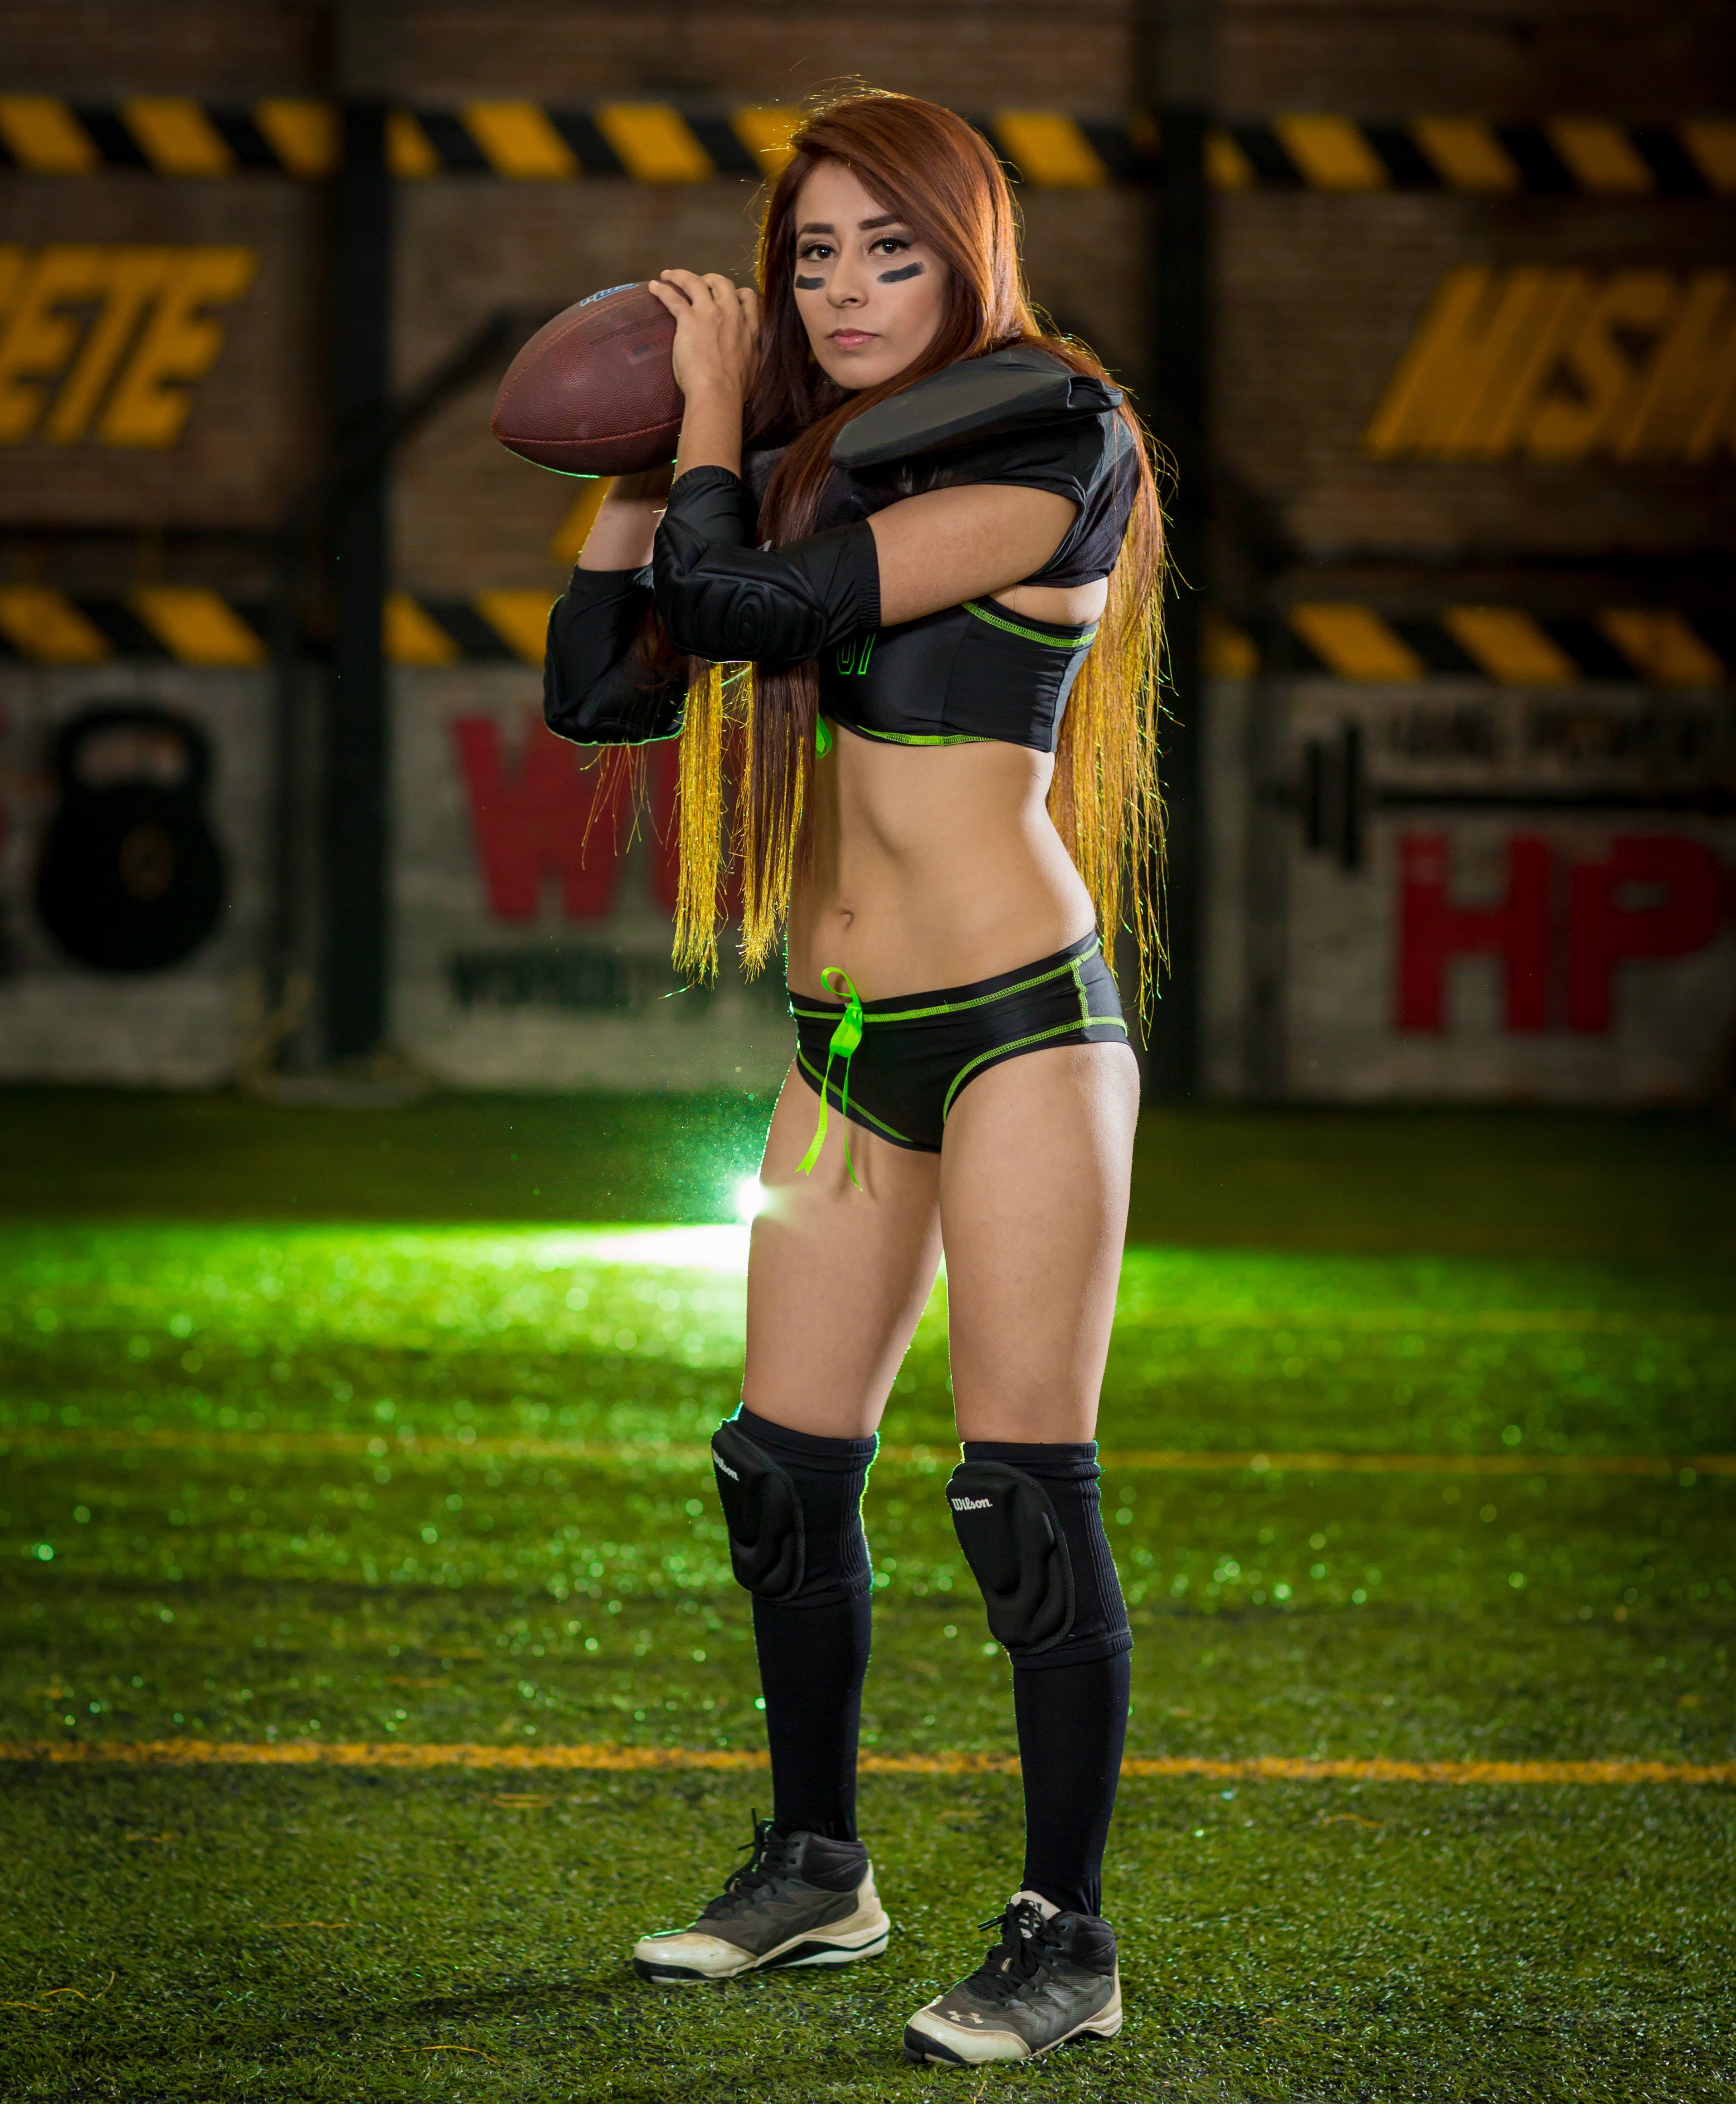 Woman wearing black-and-green sports bra and pantie holding rugby ball photo